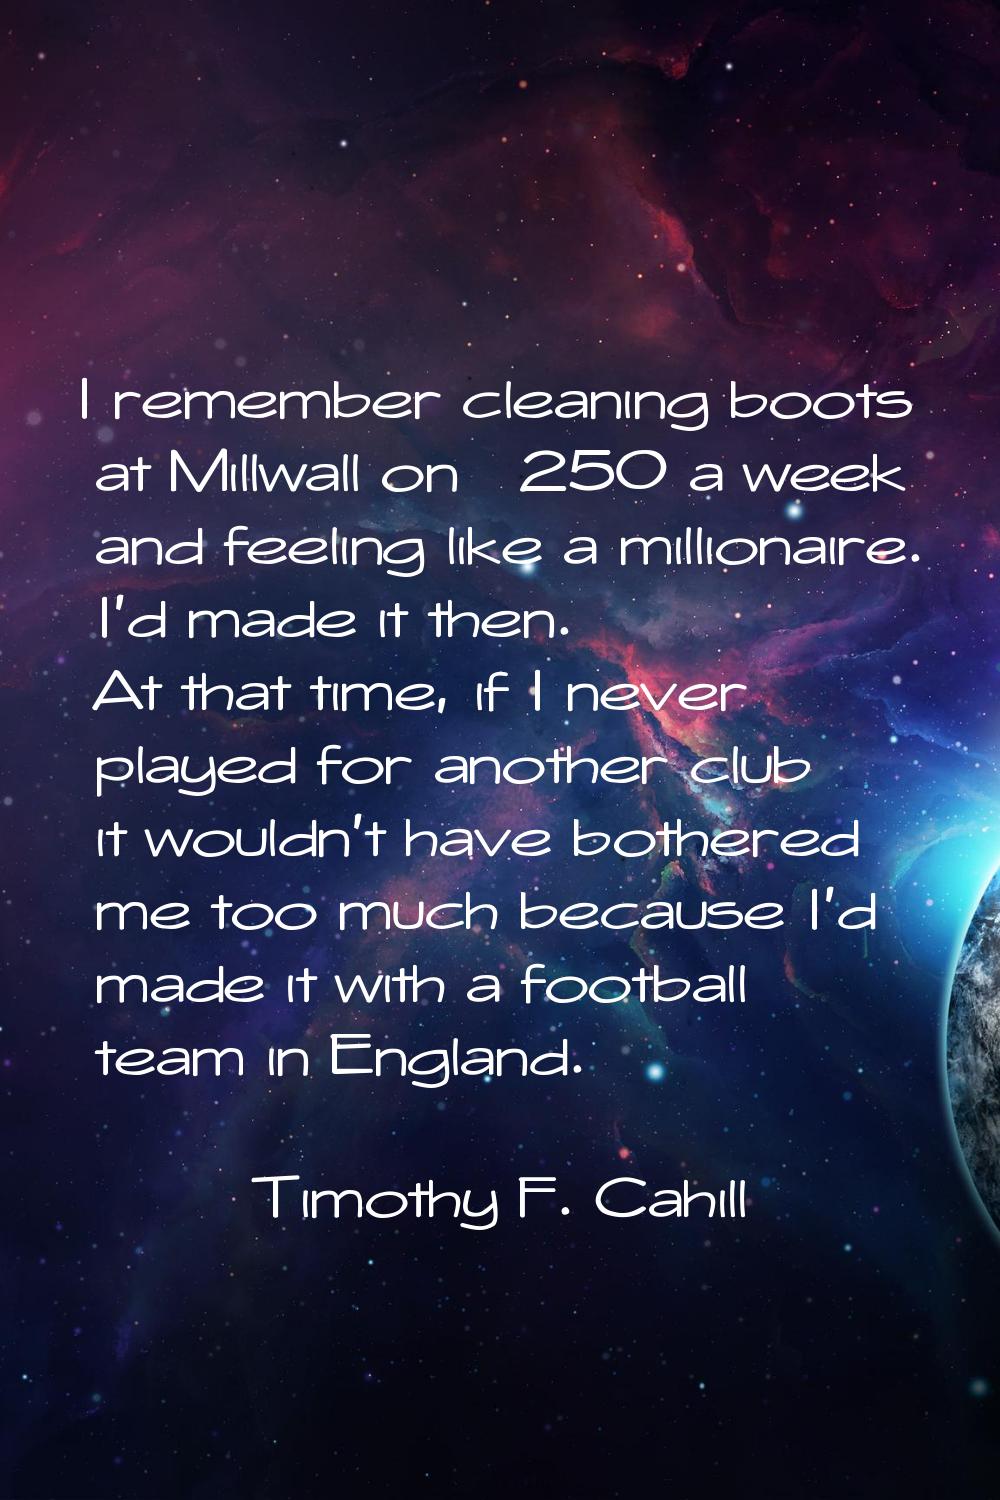 I remember cleaning boots at Millwall on £250 a week and feeling like a millionaire. I'd made it th